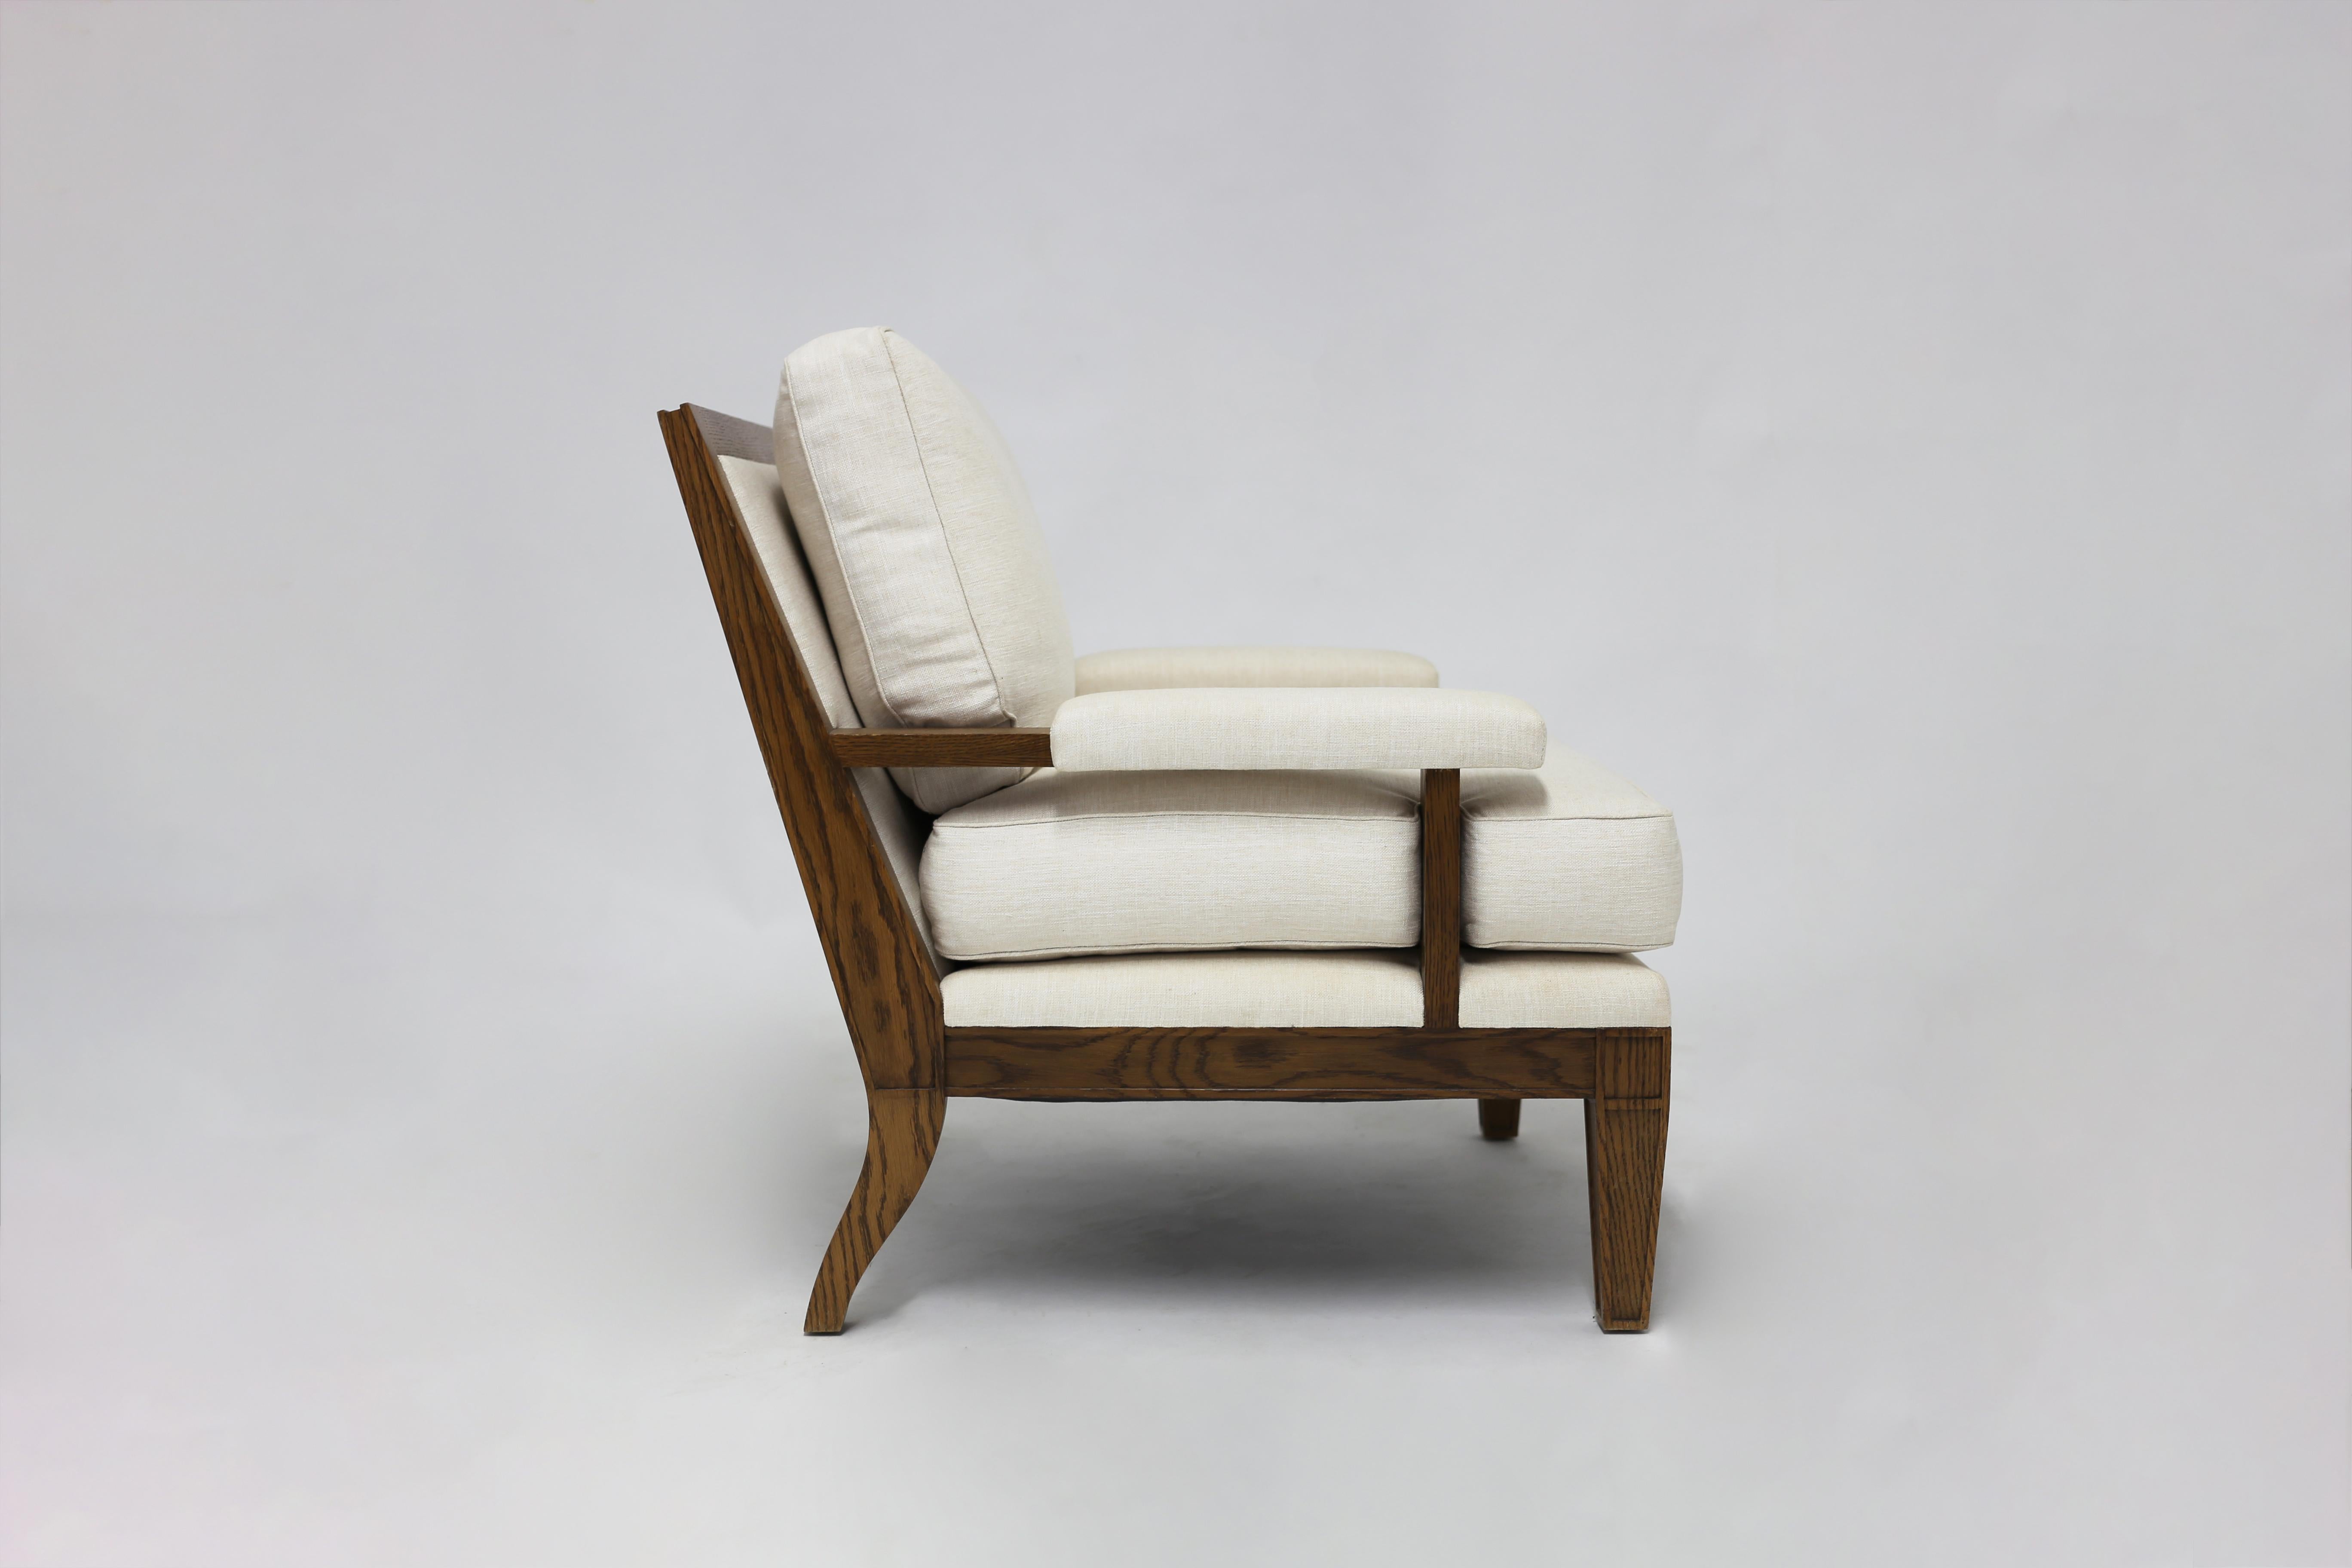 The Viva club chair is a beautifully styled and comfortable armchair shown with linen cushions and arm pads - all hand sewn cushions with feather and down inserts with carved wood frame and legs with inset panels and arm stretchers adding an elegant